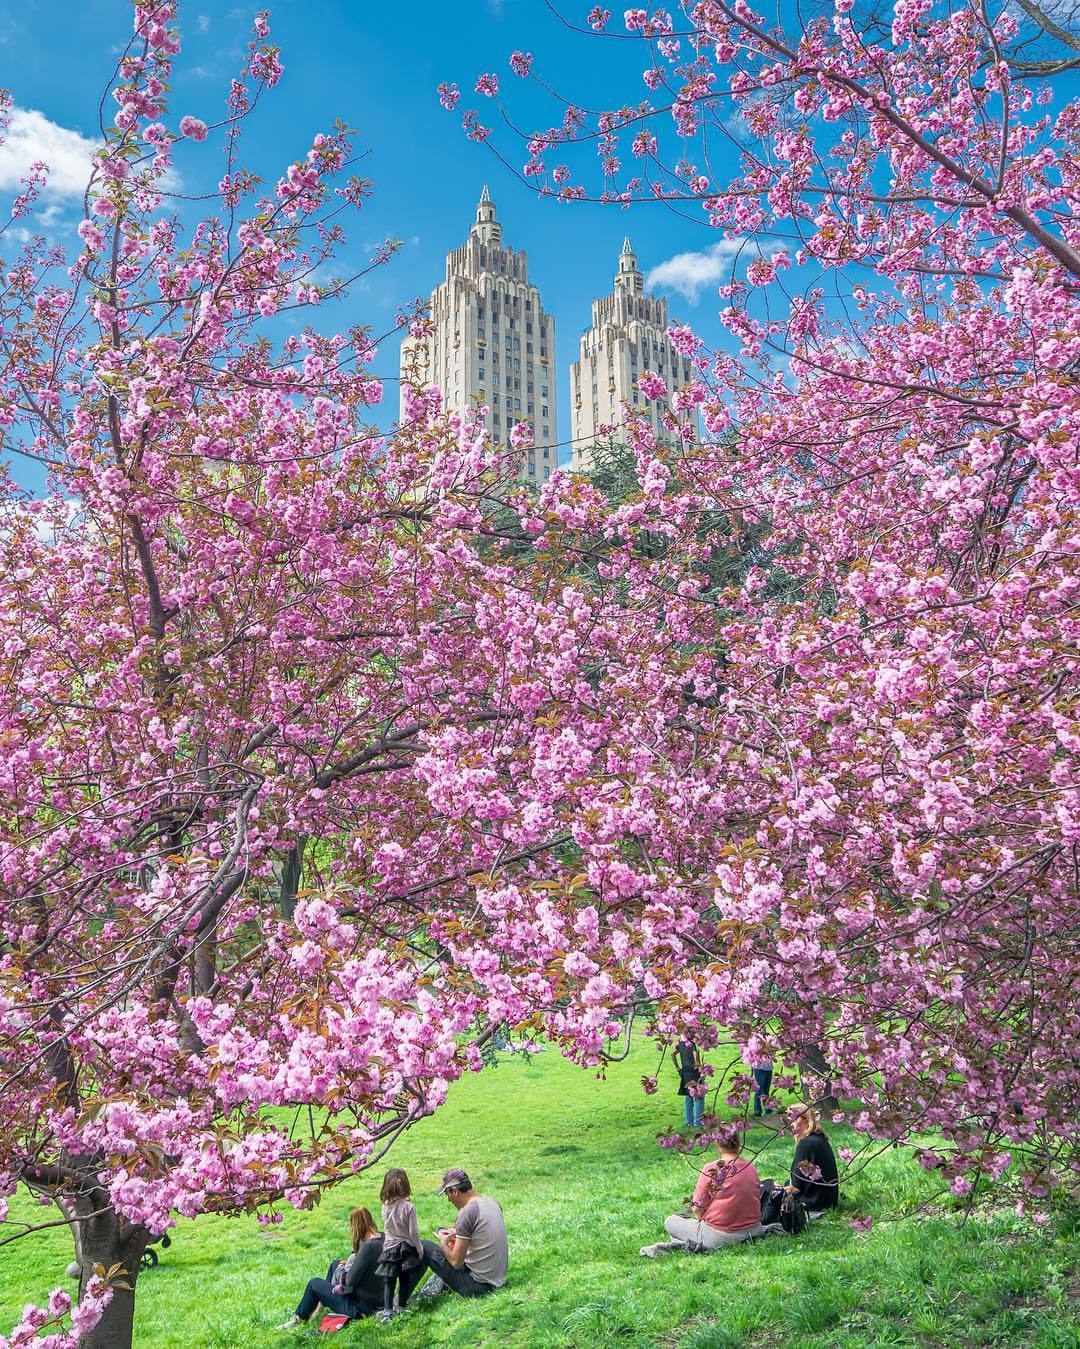 Cherry blossoms in Central Park by @Nylovesny